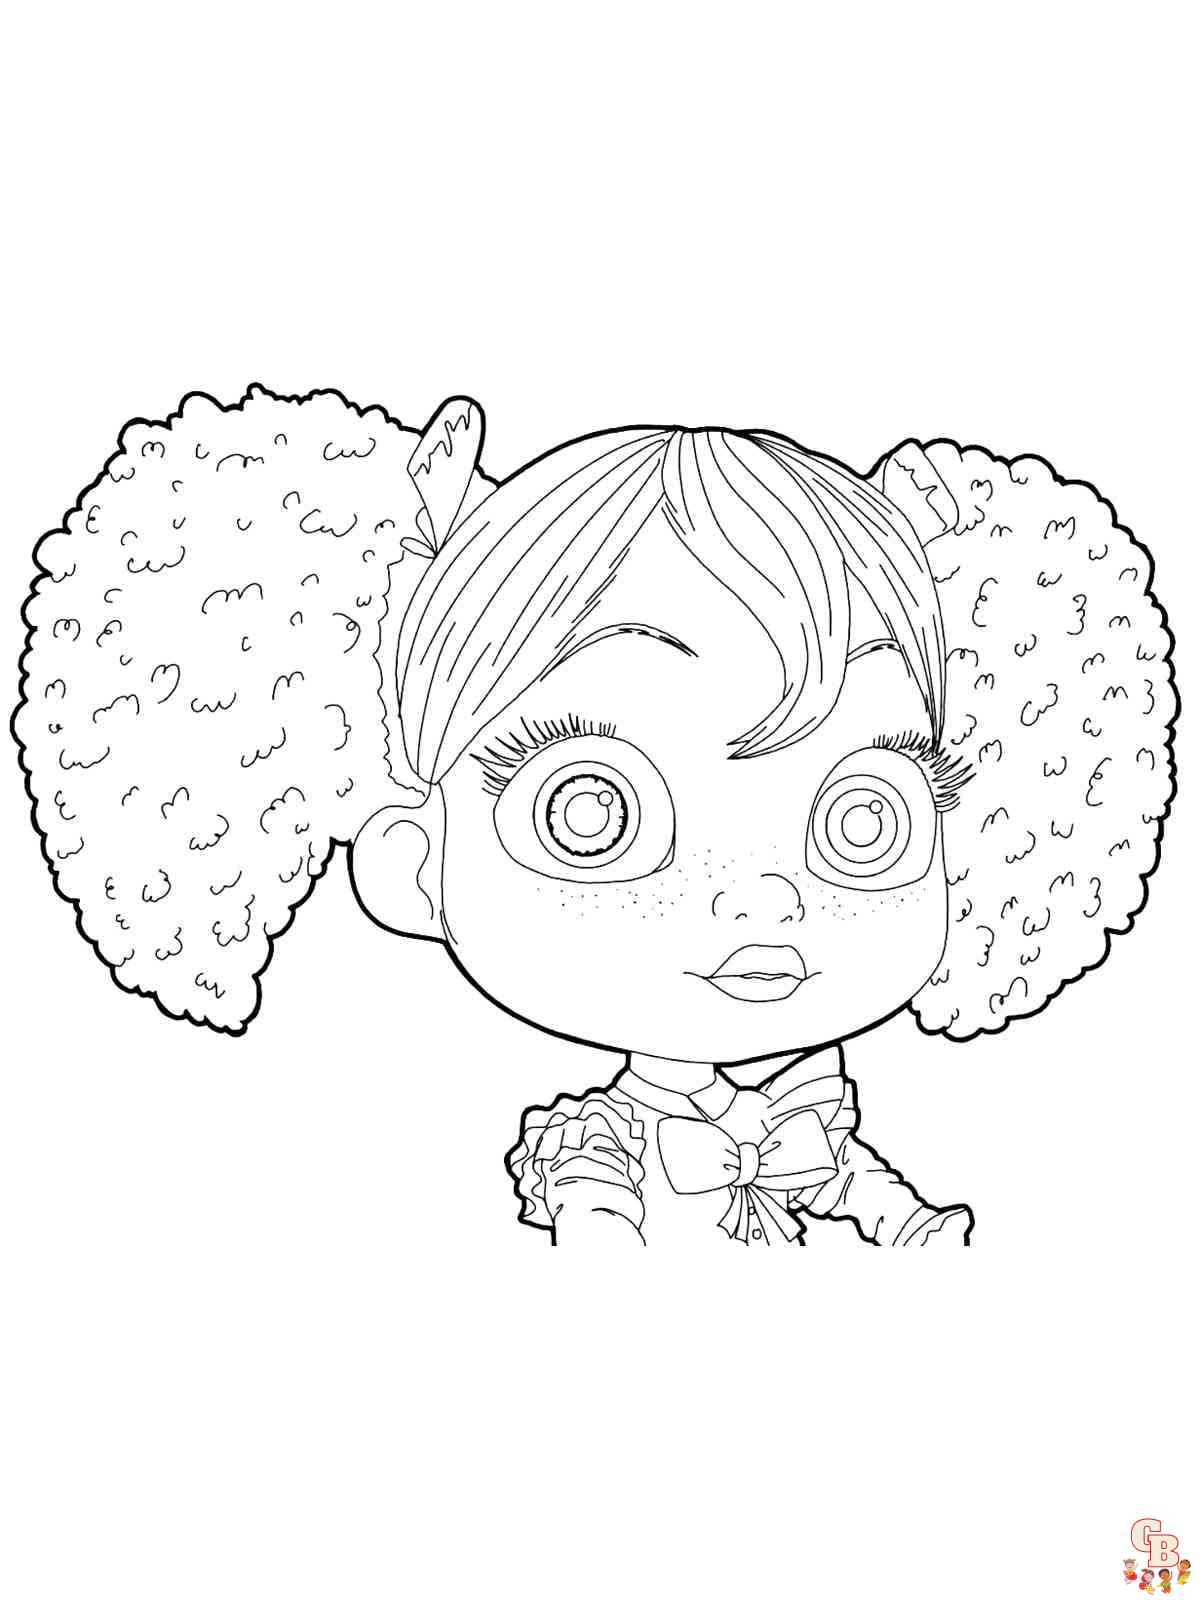 Poppy coloring page